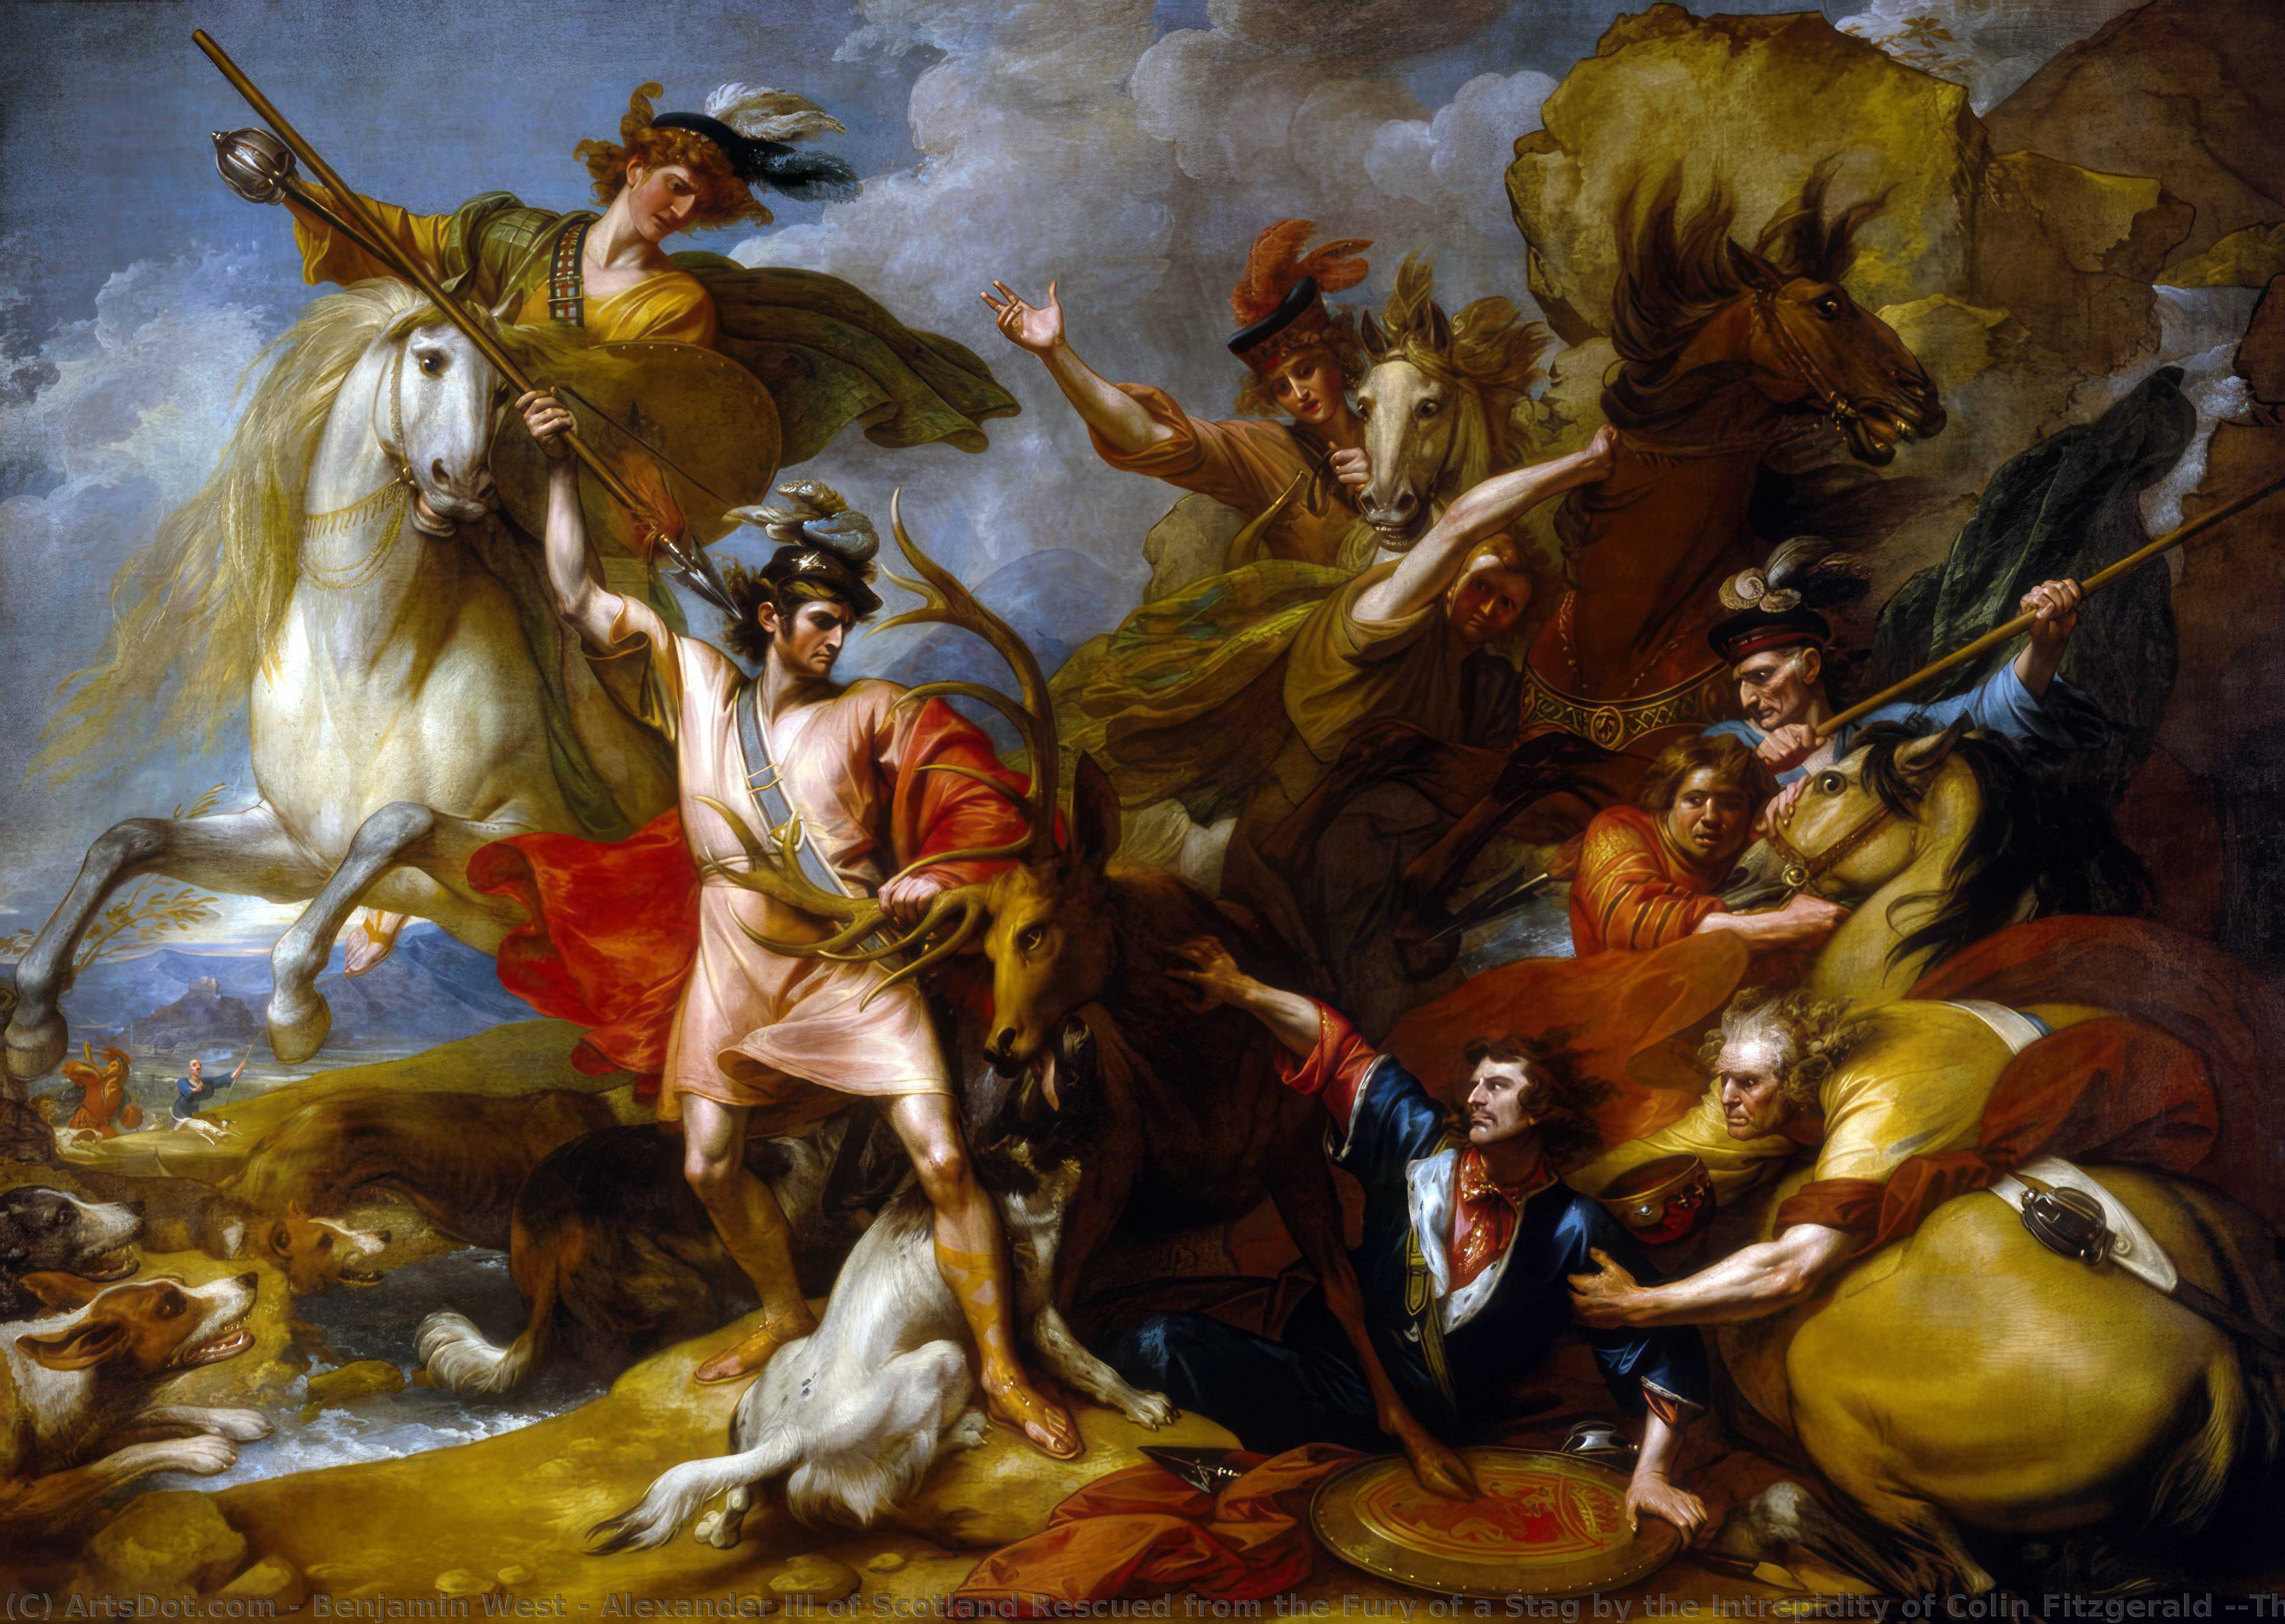 WikiOO.org - 백과 사전 - 회화, 삽화 Benjamin West - Alexander III of Scotland Rescued from the Fury of a Stag by the Intrepidity of Colin Fitzgerald ('The Death of the Stag')